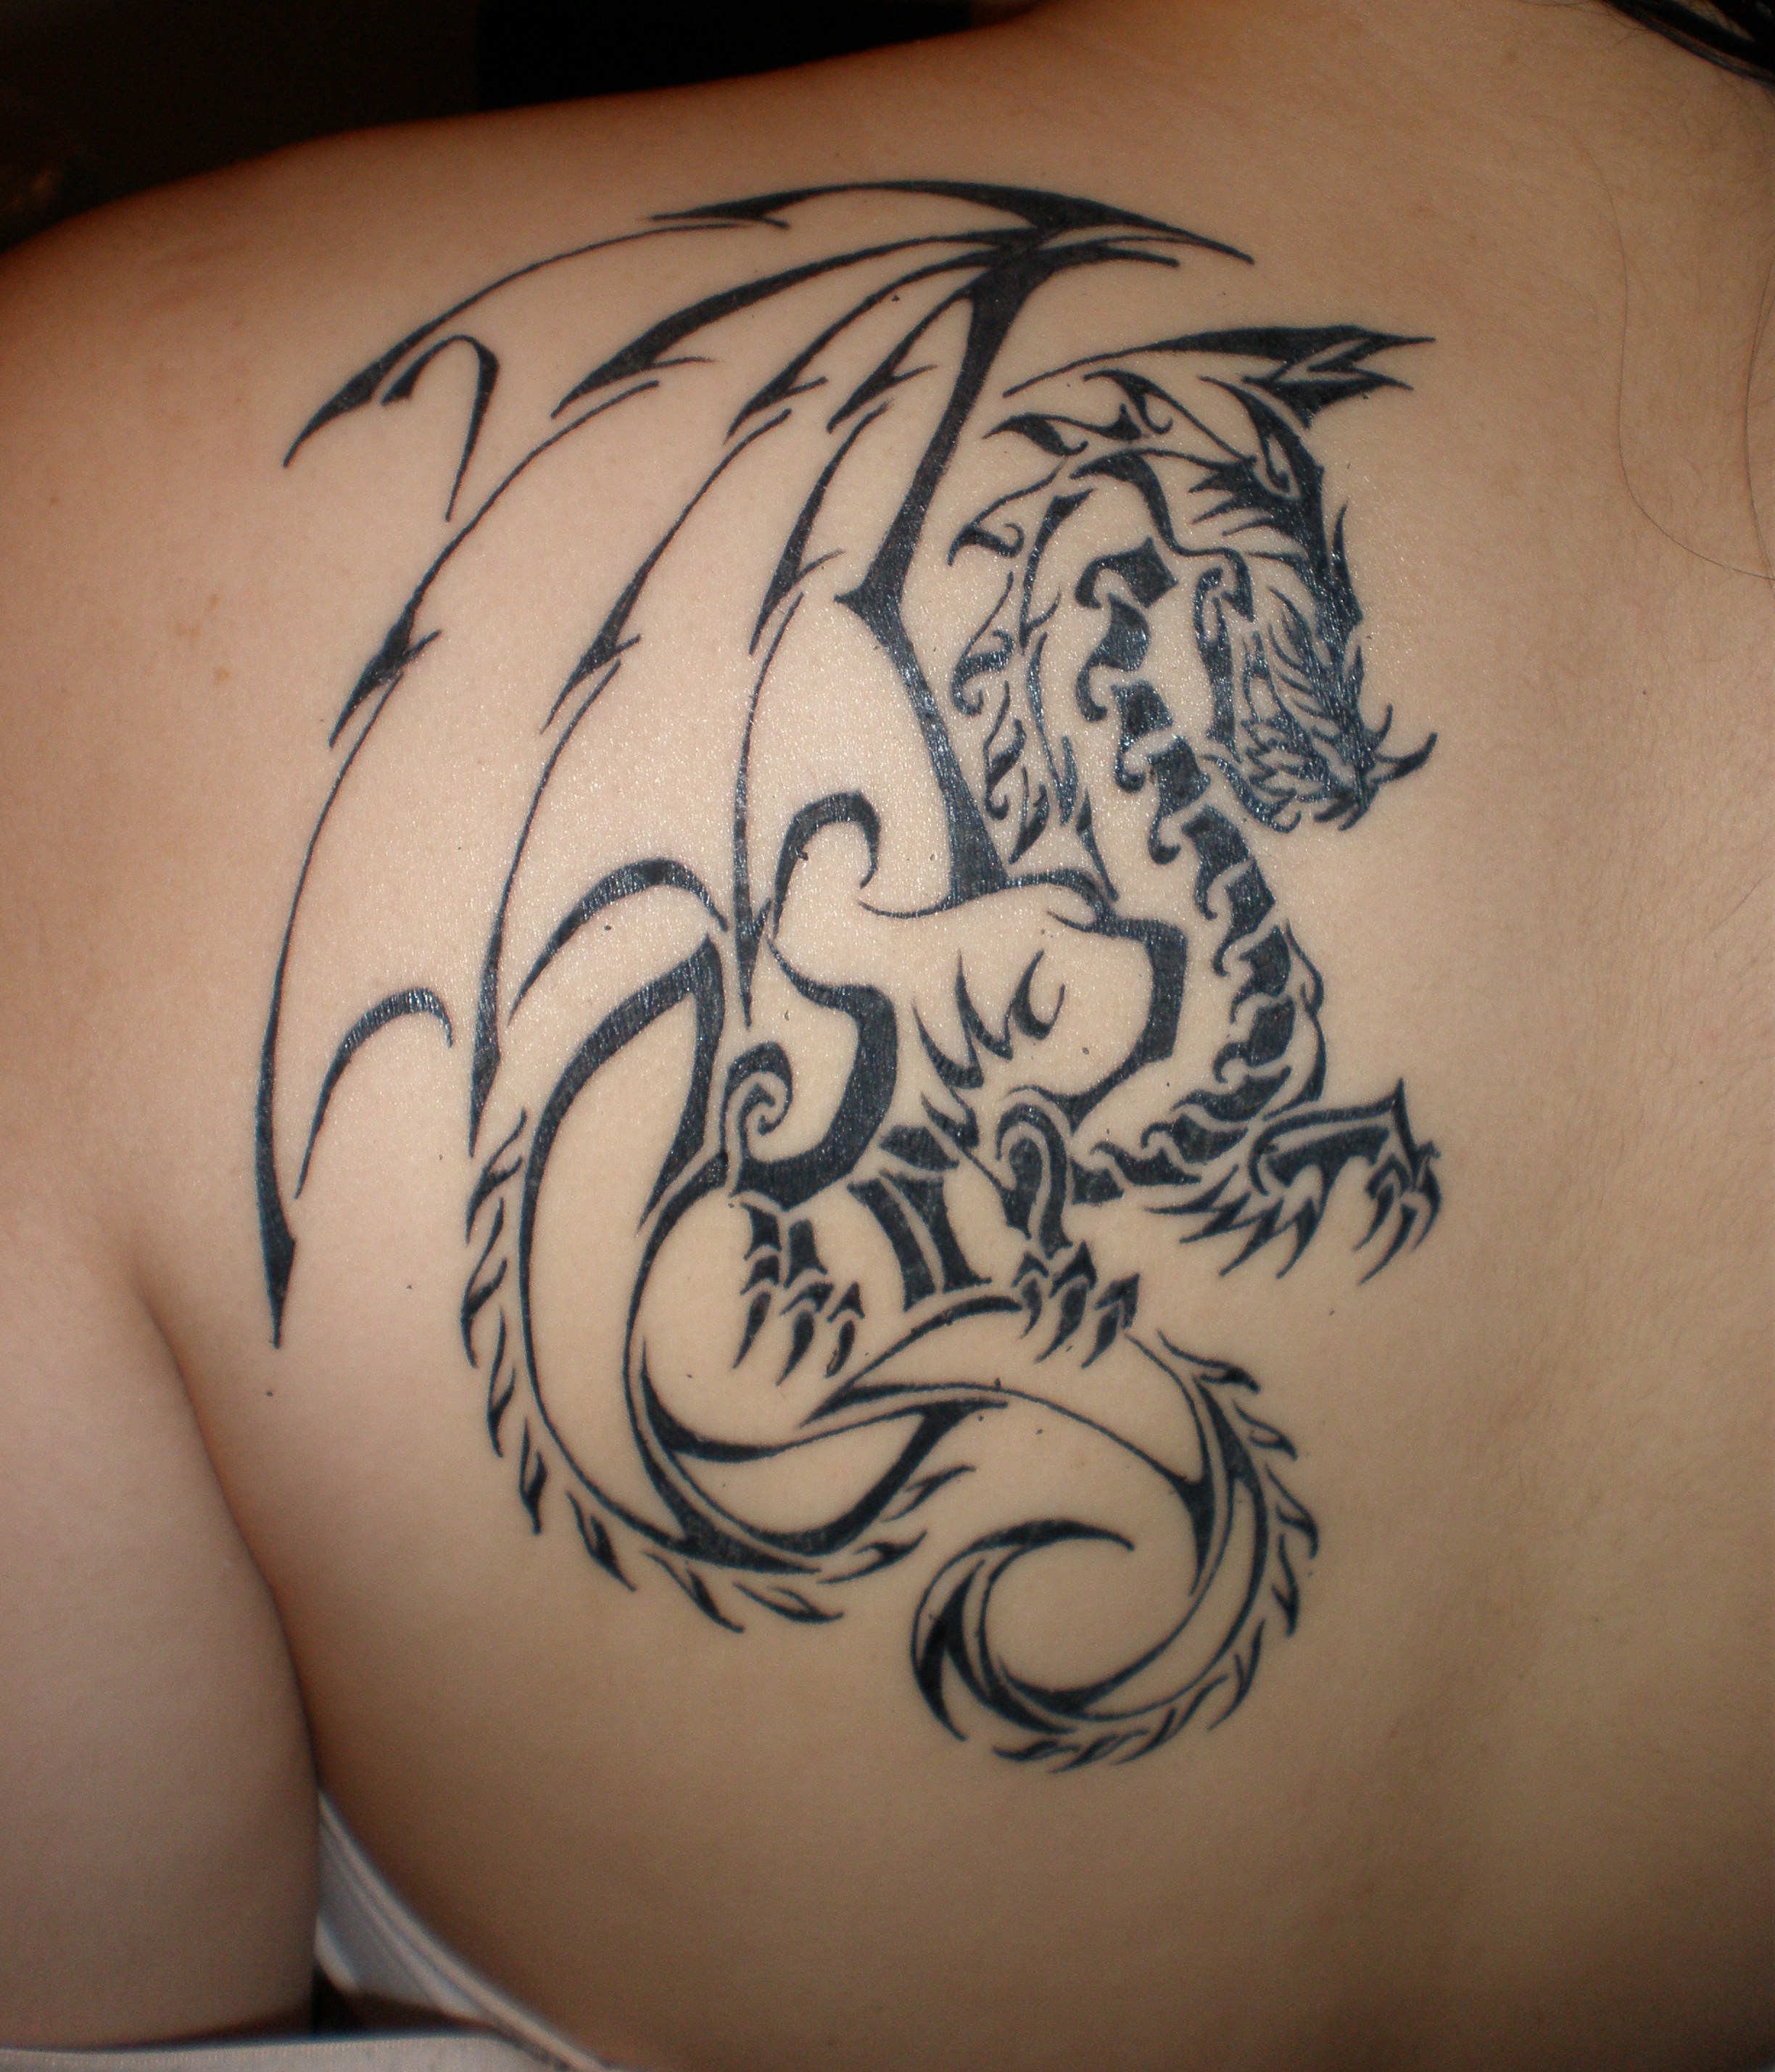 Types of Dragon Tattoo Ideas| Meaning & Image Gallery